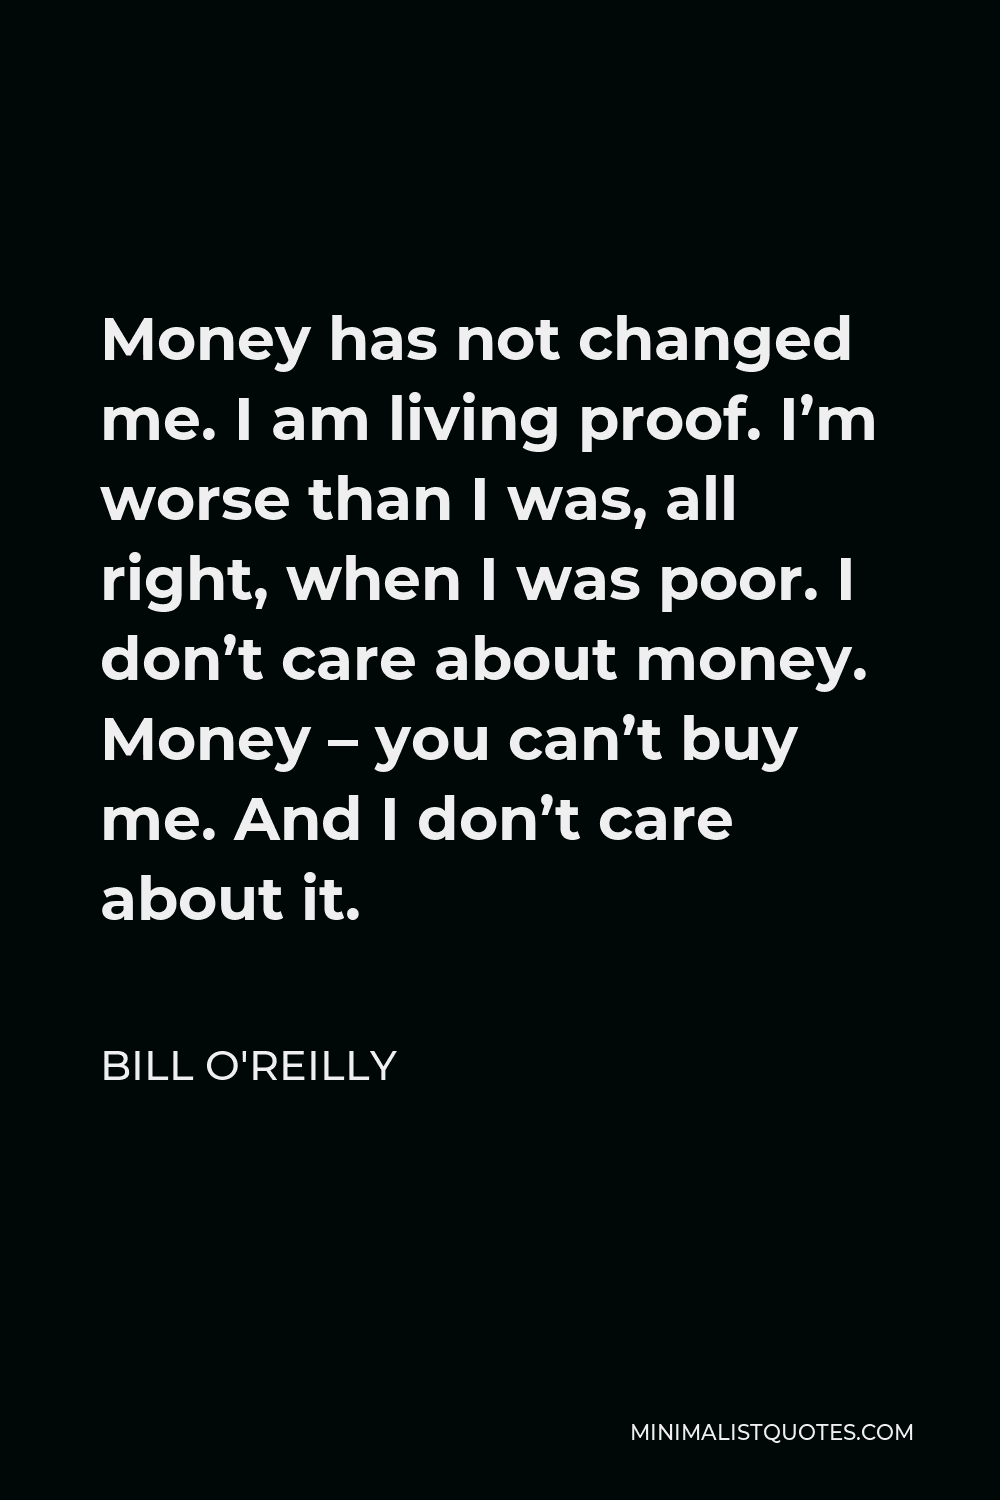 Bill O'Reilly Quote - Money has not changed me. I am living proof. I’m worse than I was, all right, when I was poor. I don’t care about money. Money – you can’t buy me. And I don’t care about it.